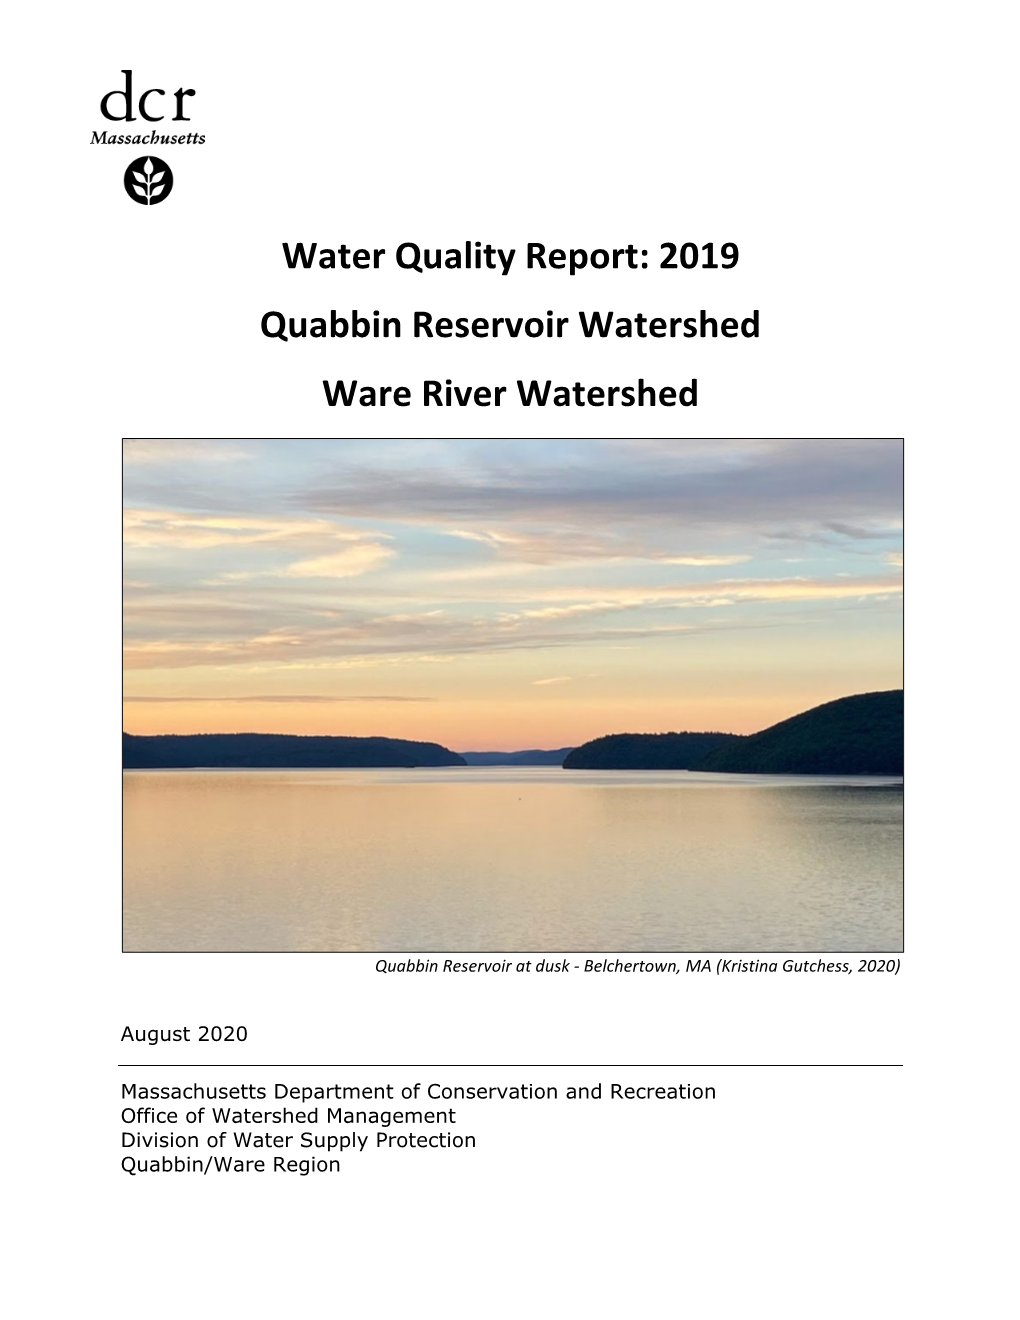 2019 Quabbin Reservoir and Ware River Water Quality Report